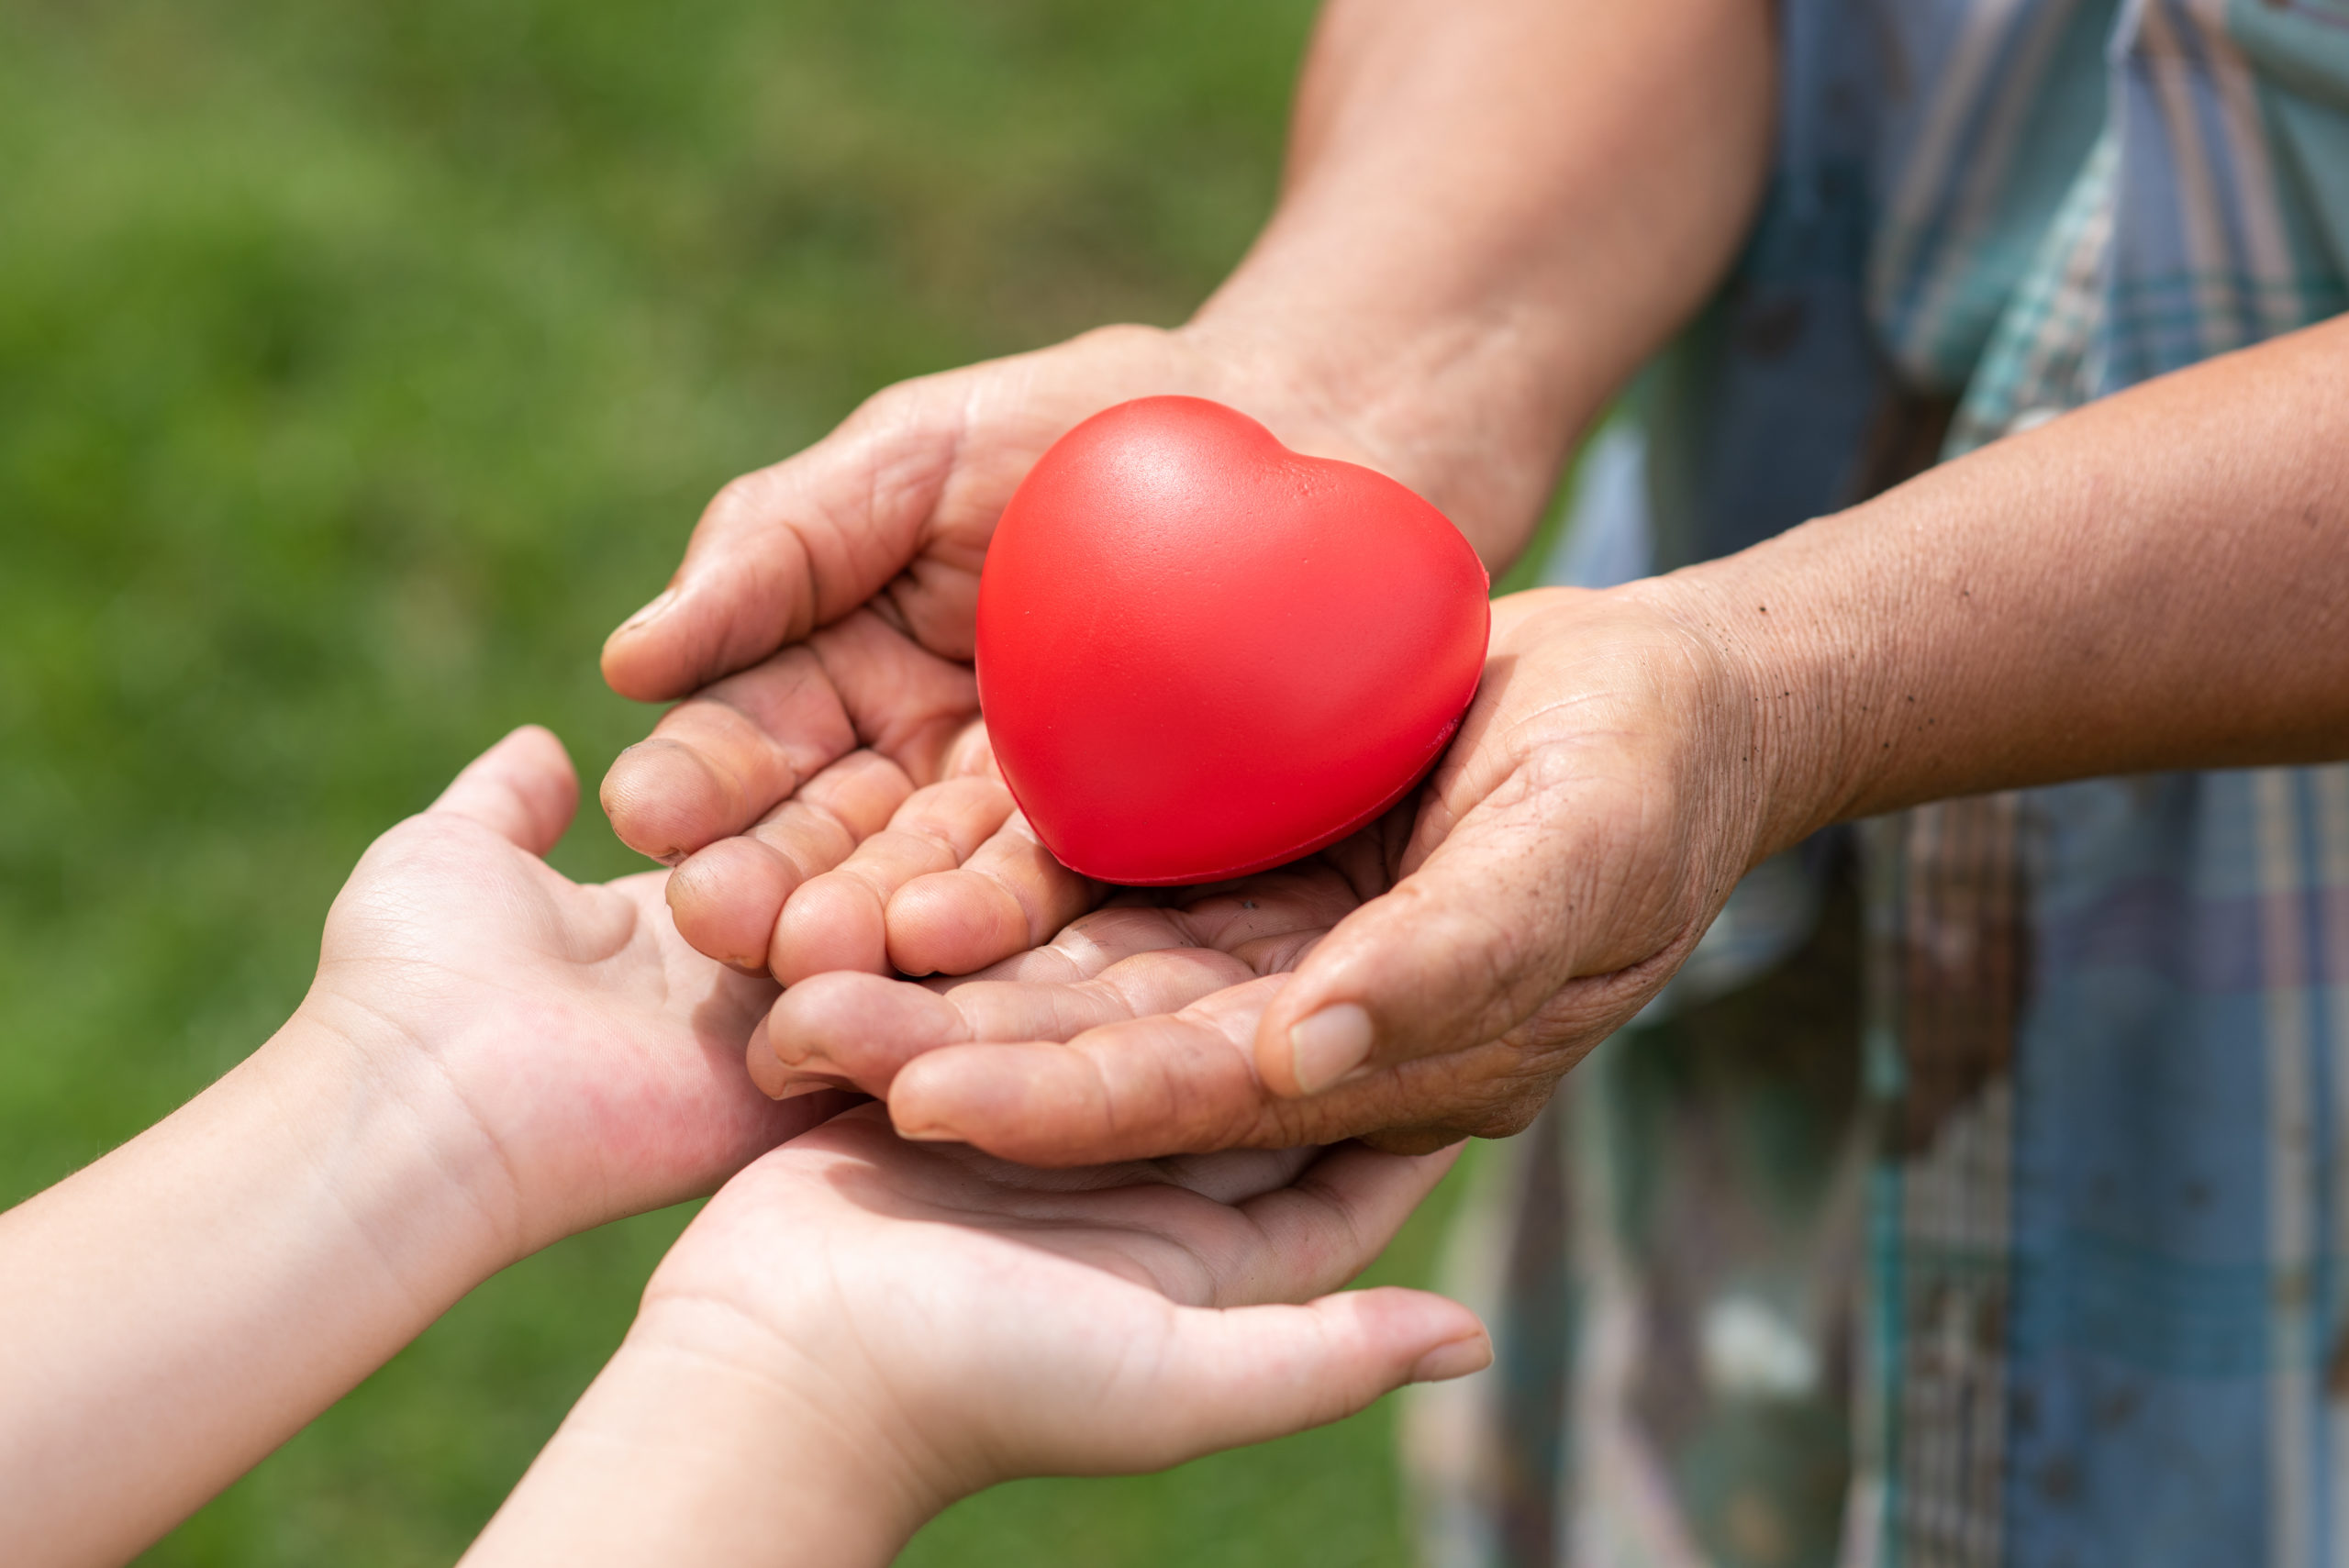 Two pairs of hands, one of a young child, one of an older person. Small red heart cushion sitting in the hands of the older person.